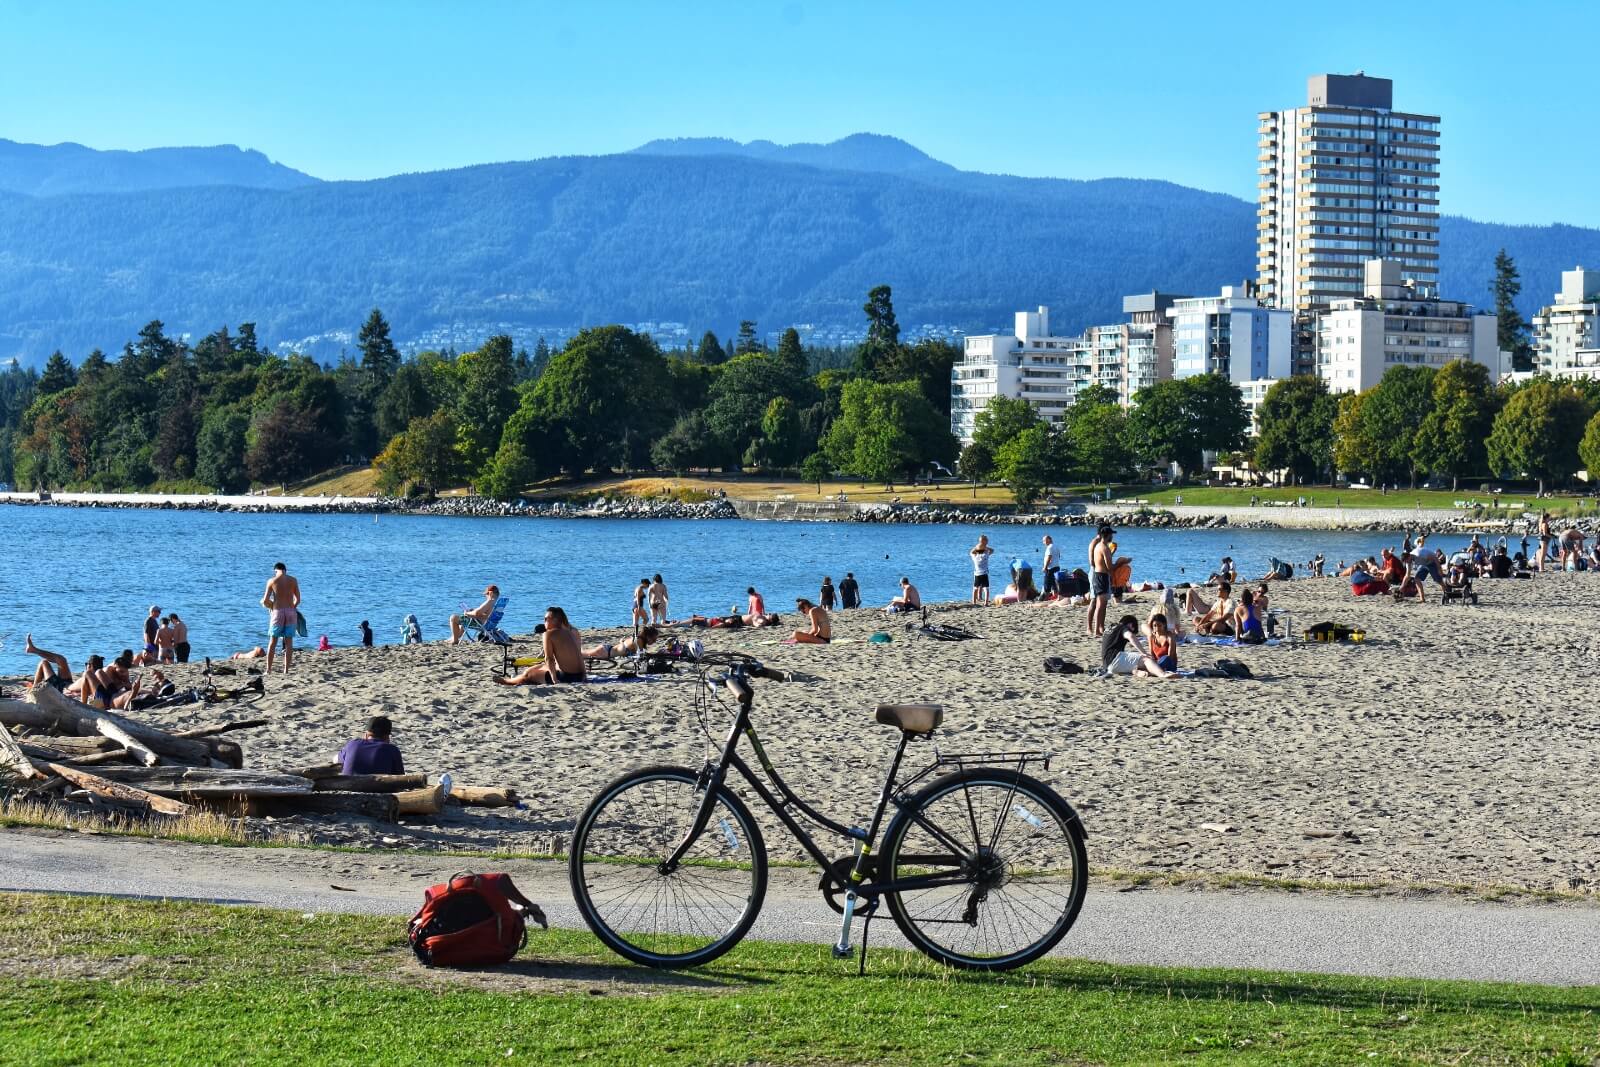 a bicycle on its stand at second beach vancouver bc canada